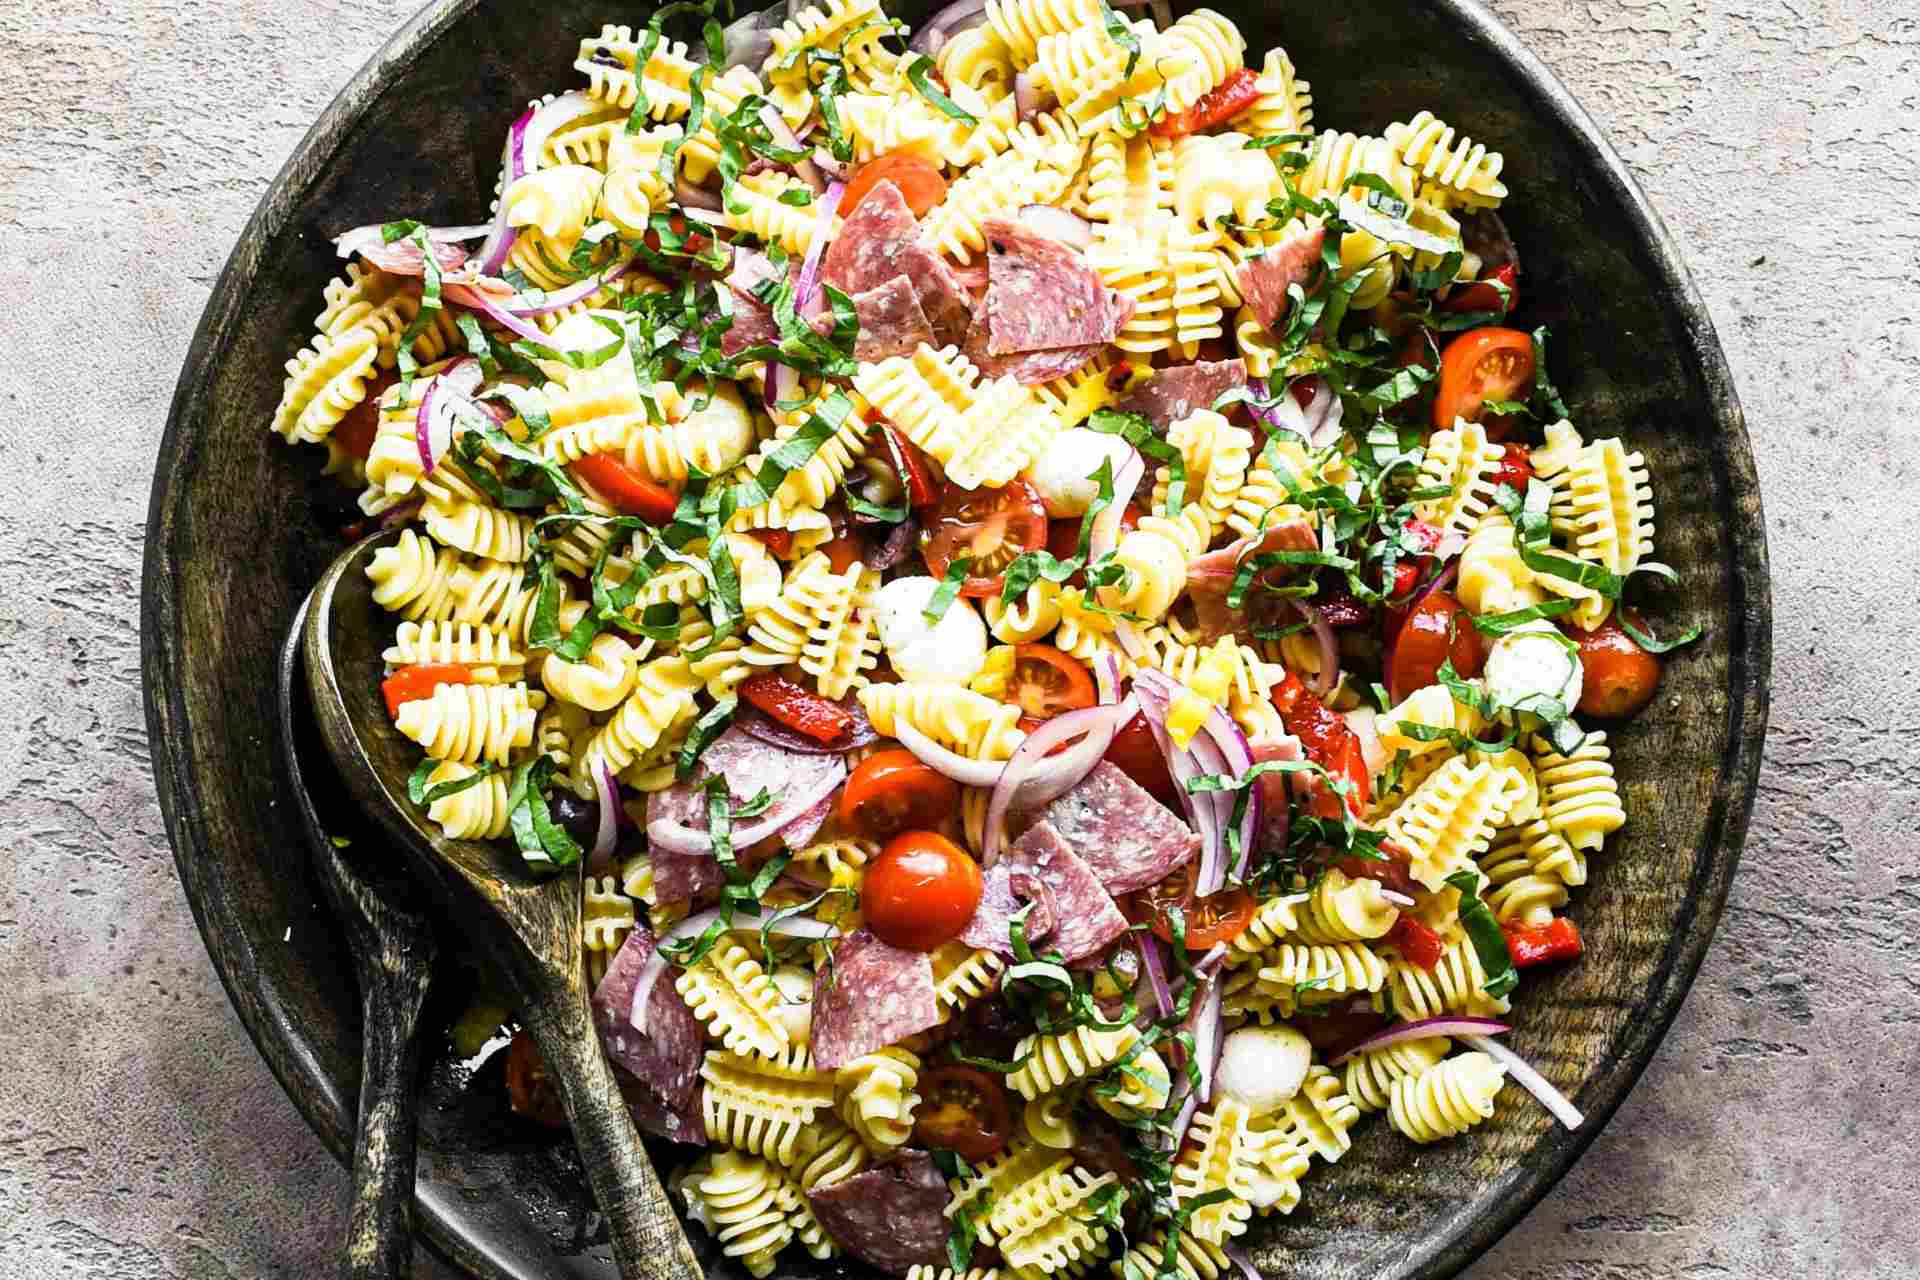 Global Eats: 12 Recipes For An Italian-Inspired Feast